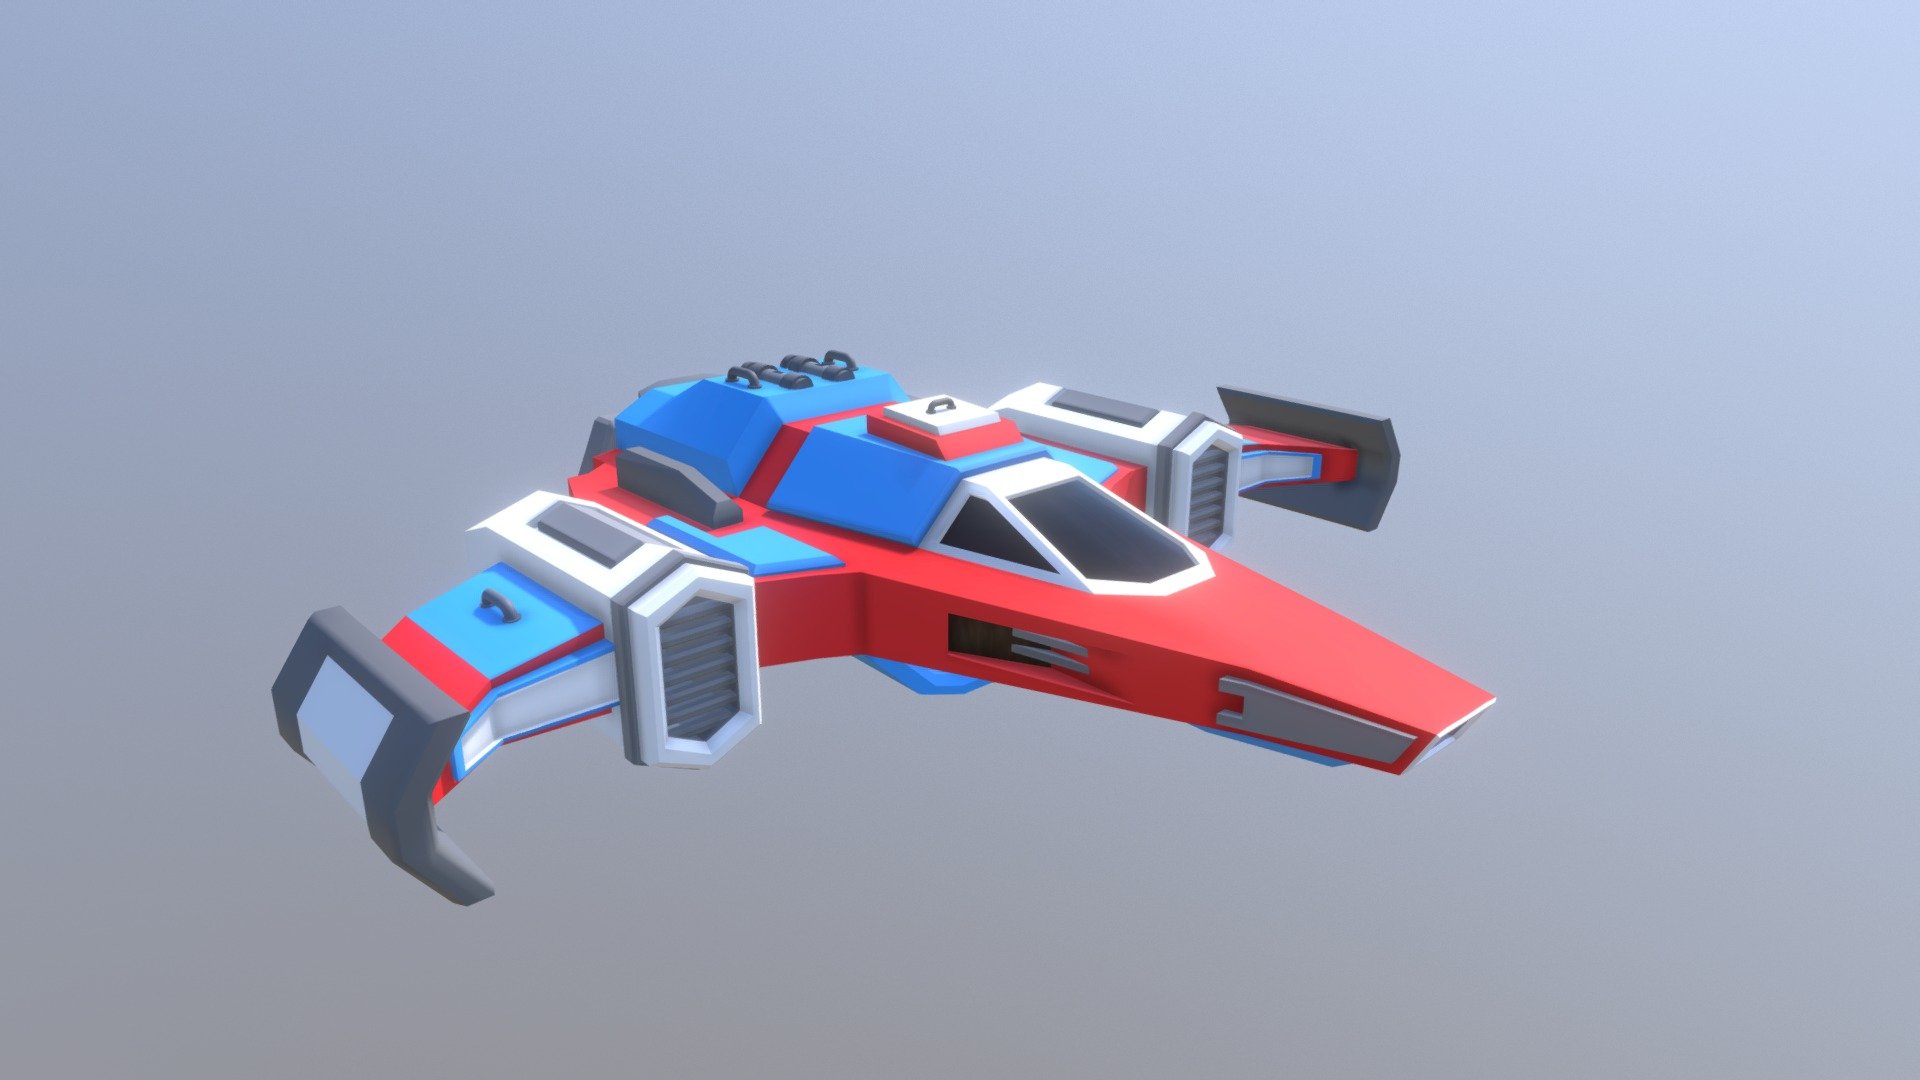 Top Space Ship - Toy Space Ship - 3D model by 3DRL (@SaestudentRL) 3d model